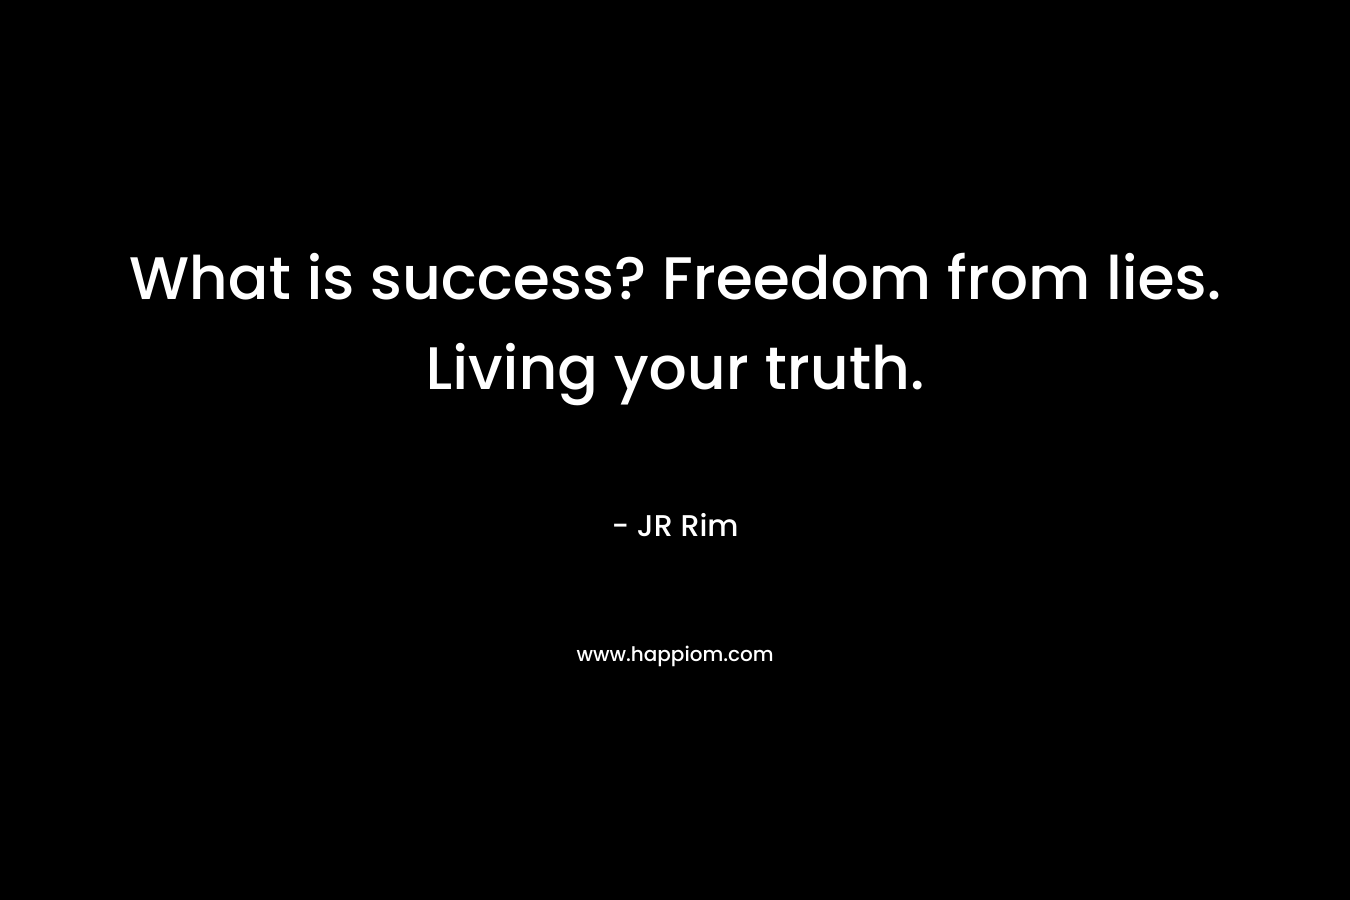 What is success? Freedom from lies. Living your truth.